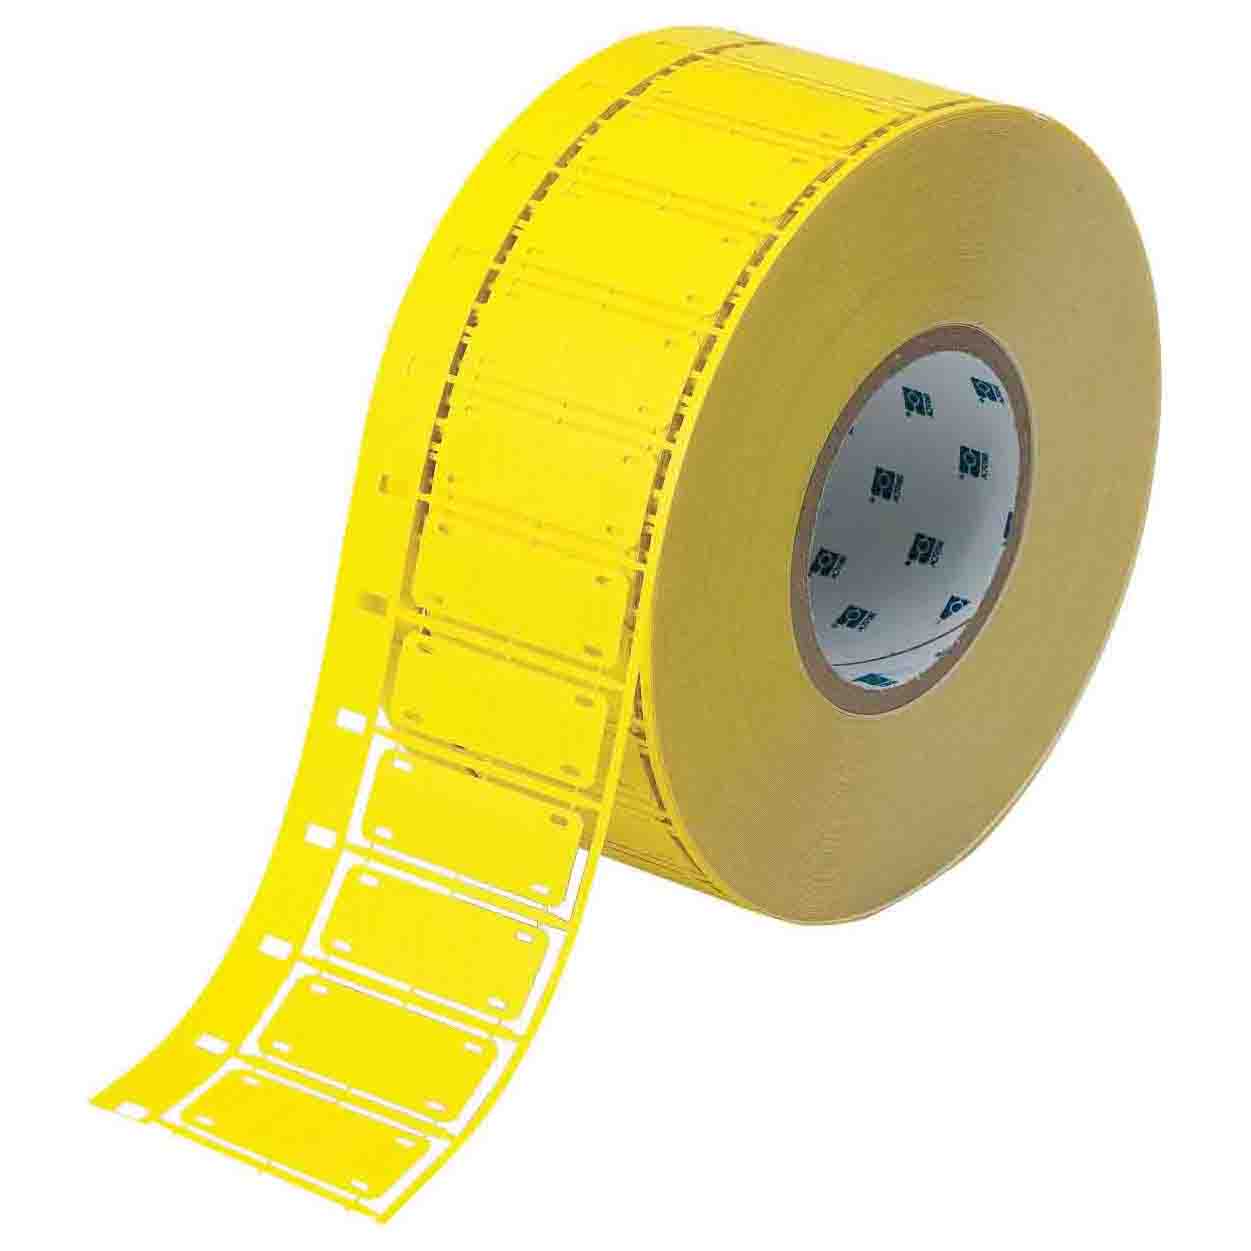 Nomex 0.80x2.2" Cable & Harness Marking Tags Yellow 2,500 per Roll